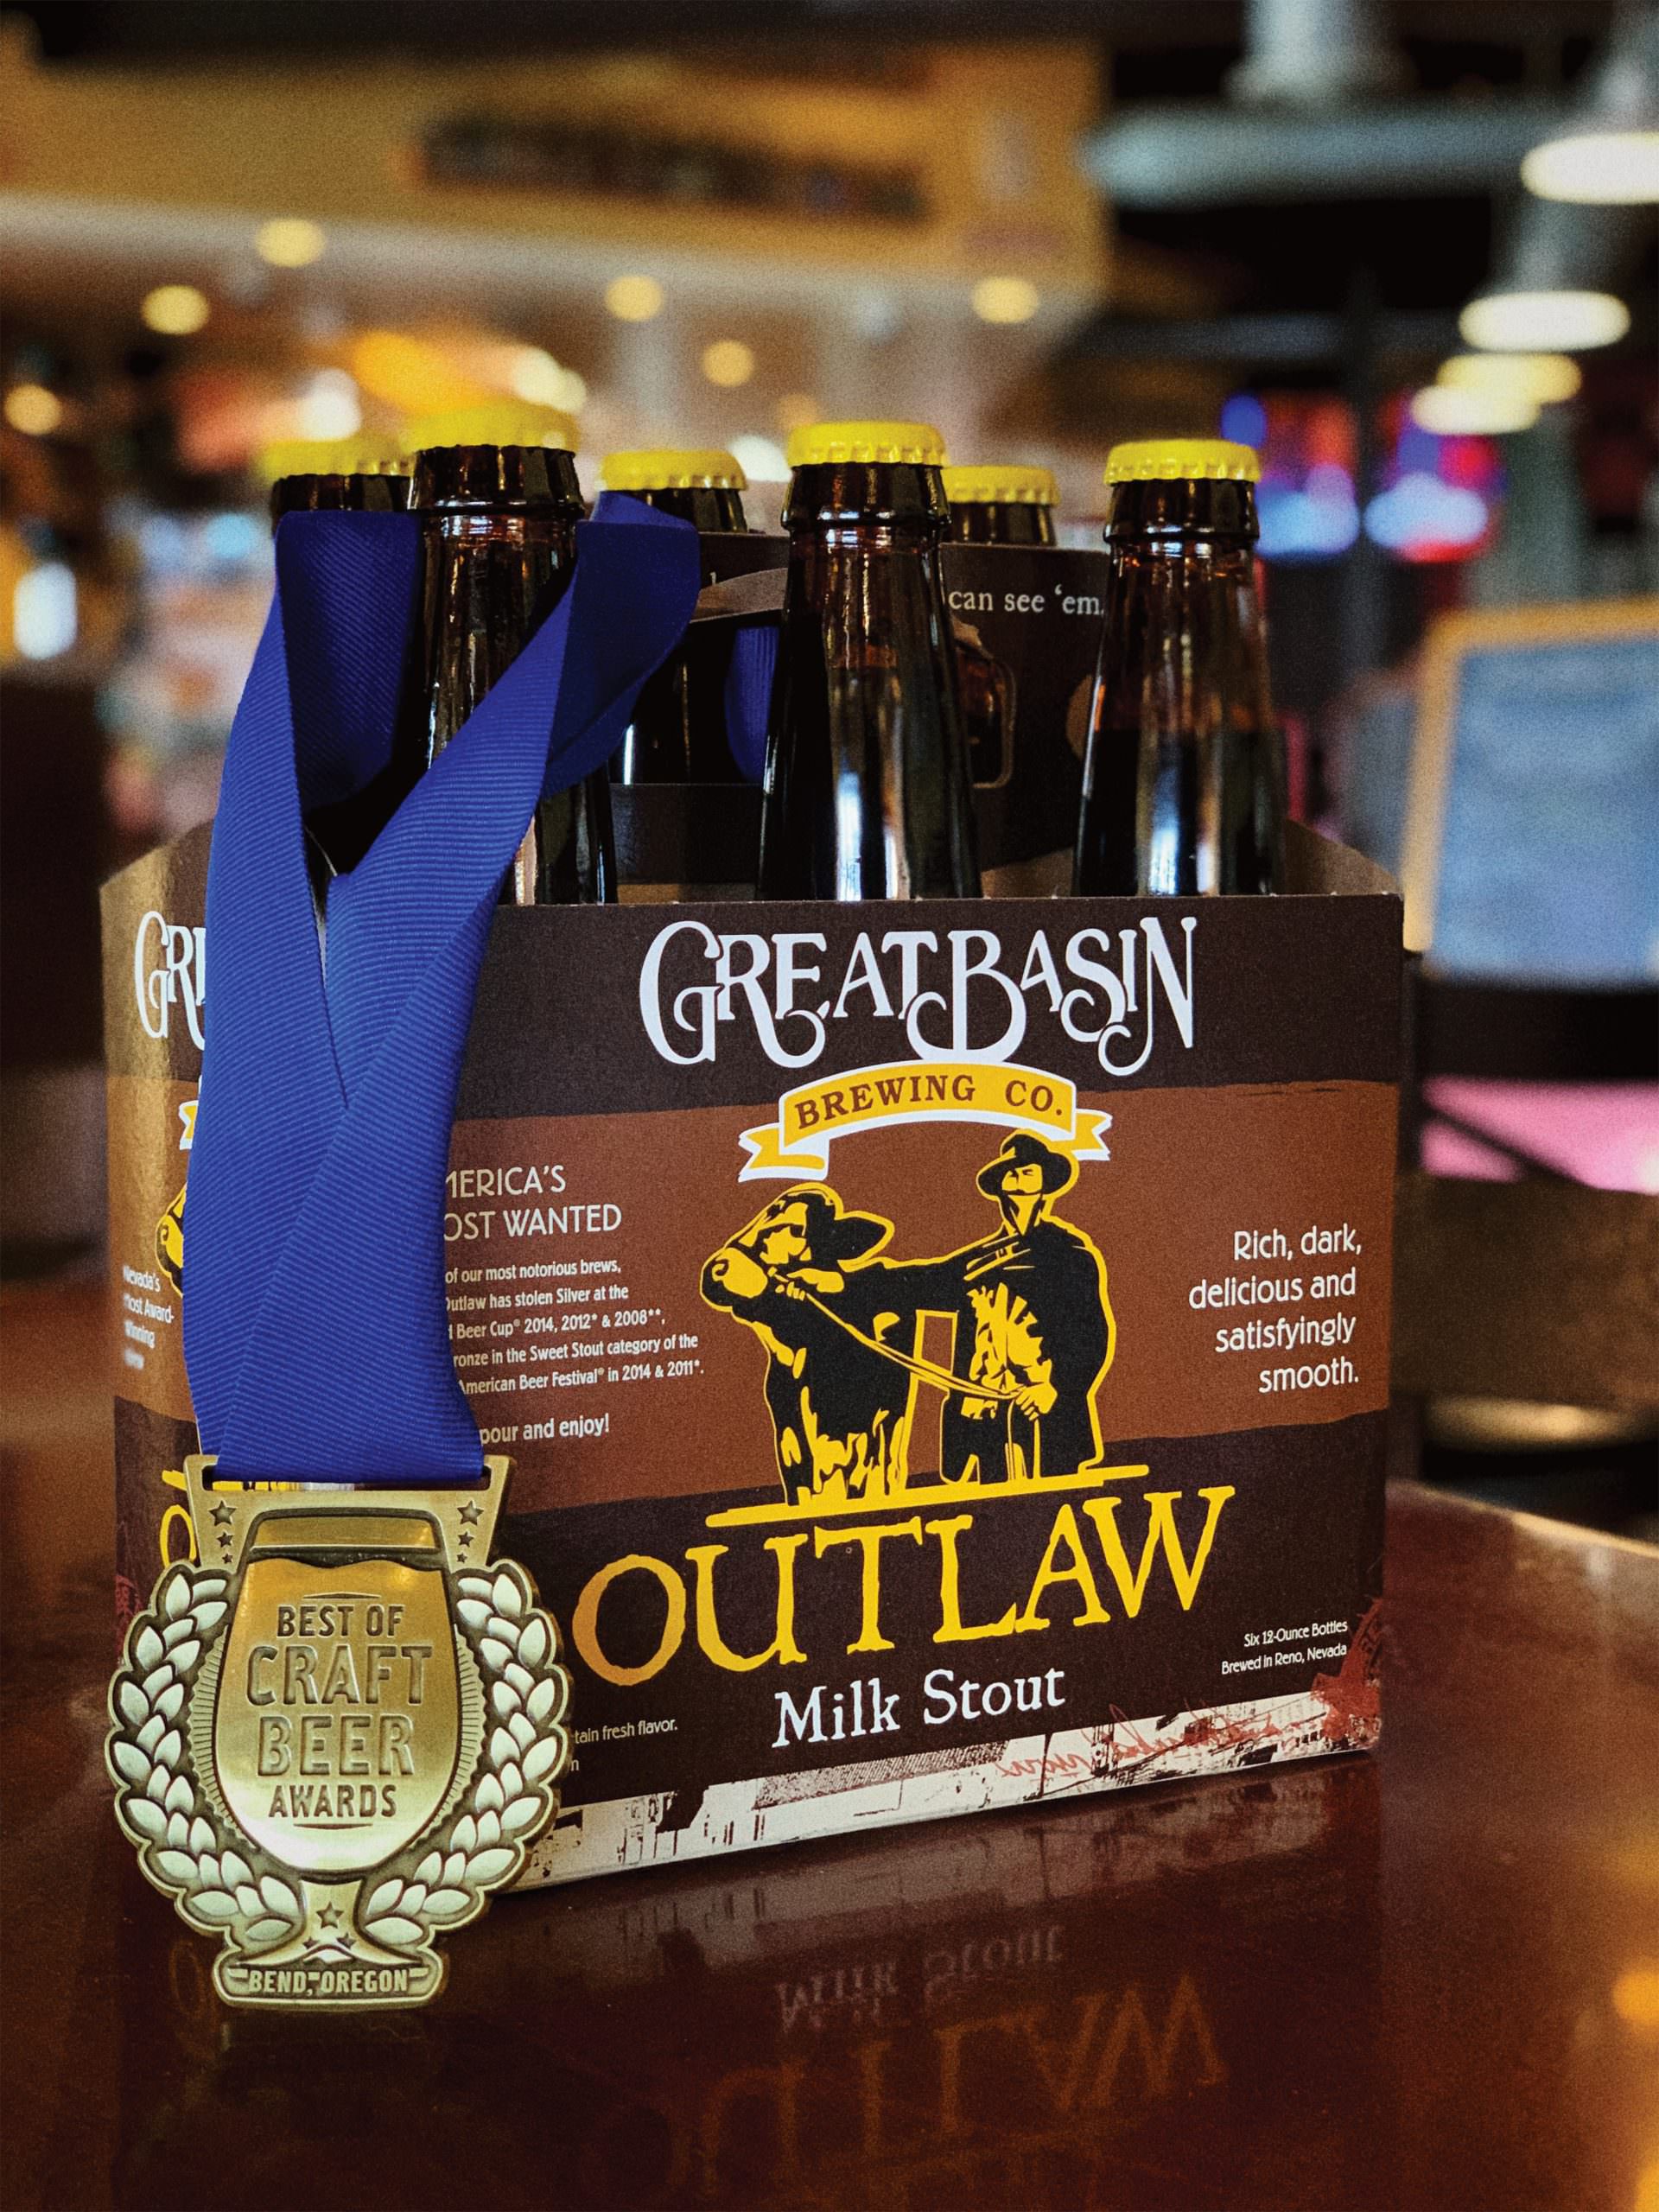 Great Basin Brewing Co.s Outlaw Milk Stout won gold at The Best of Craft Beer Awards